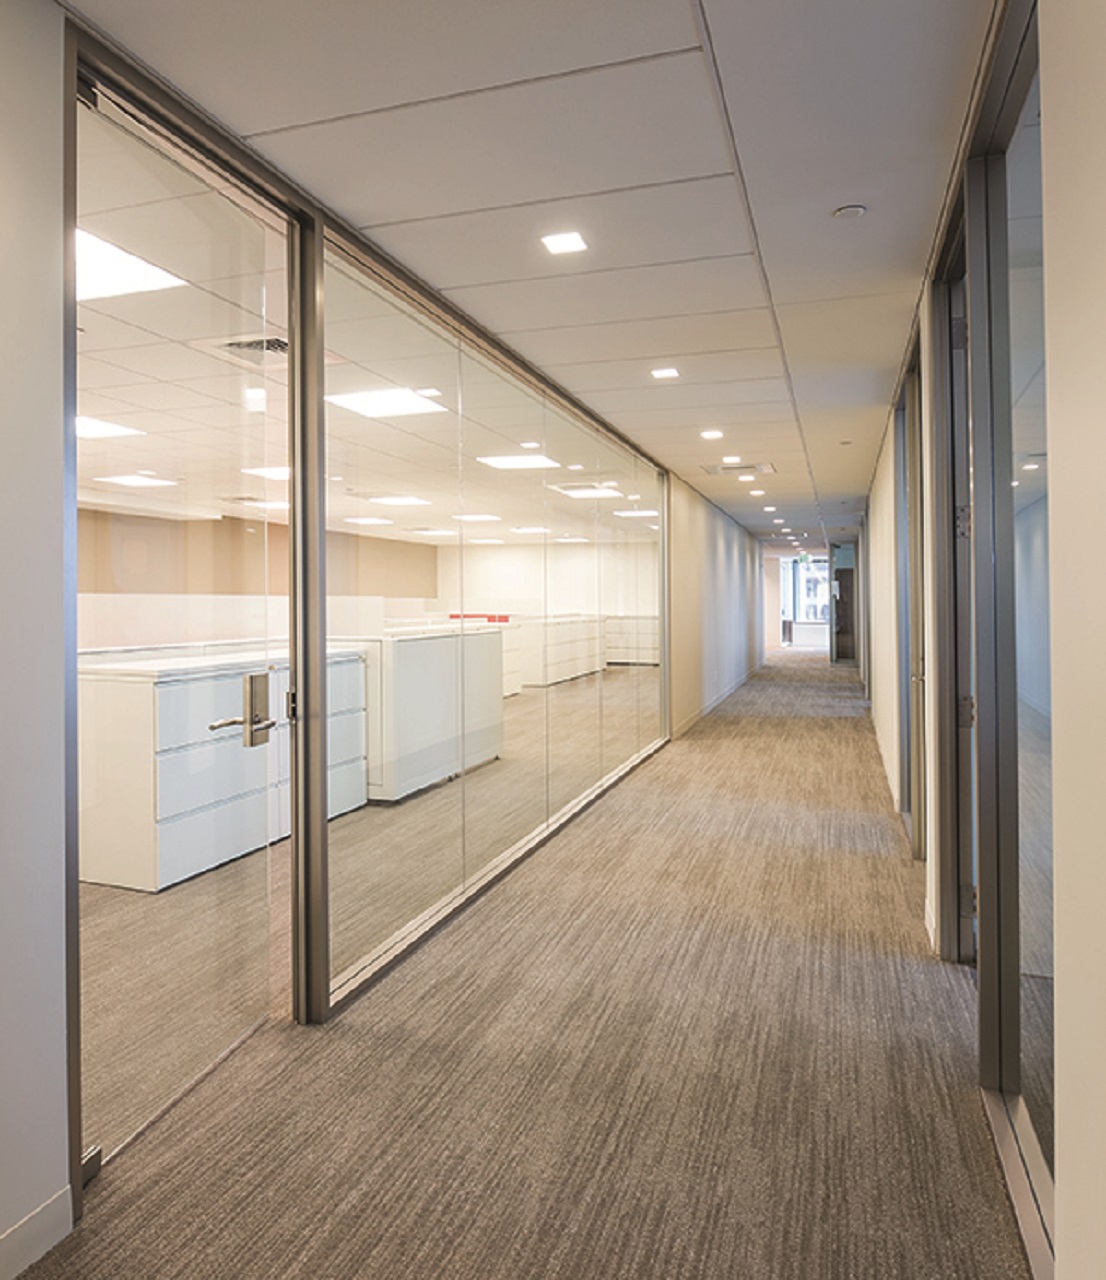 Empty office hallway of Cozen O’Connor in Pennsylvania, with a well-lit office with glass walls and door